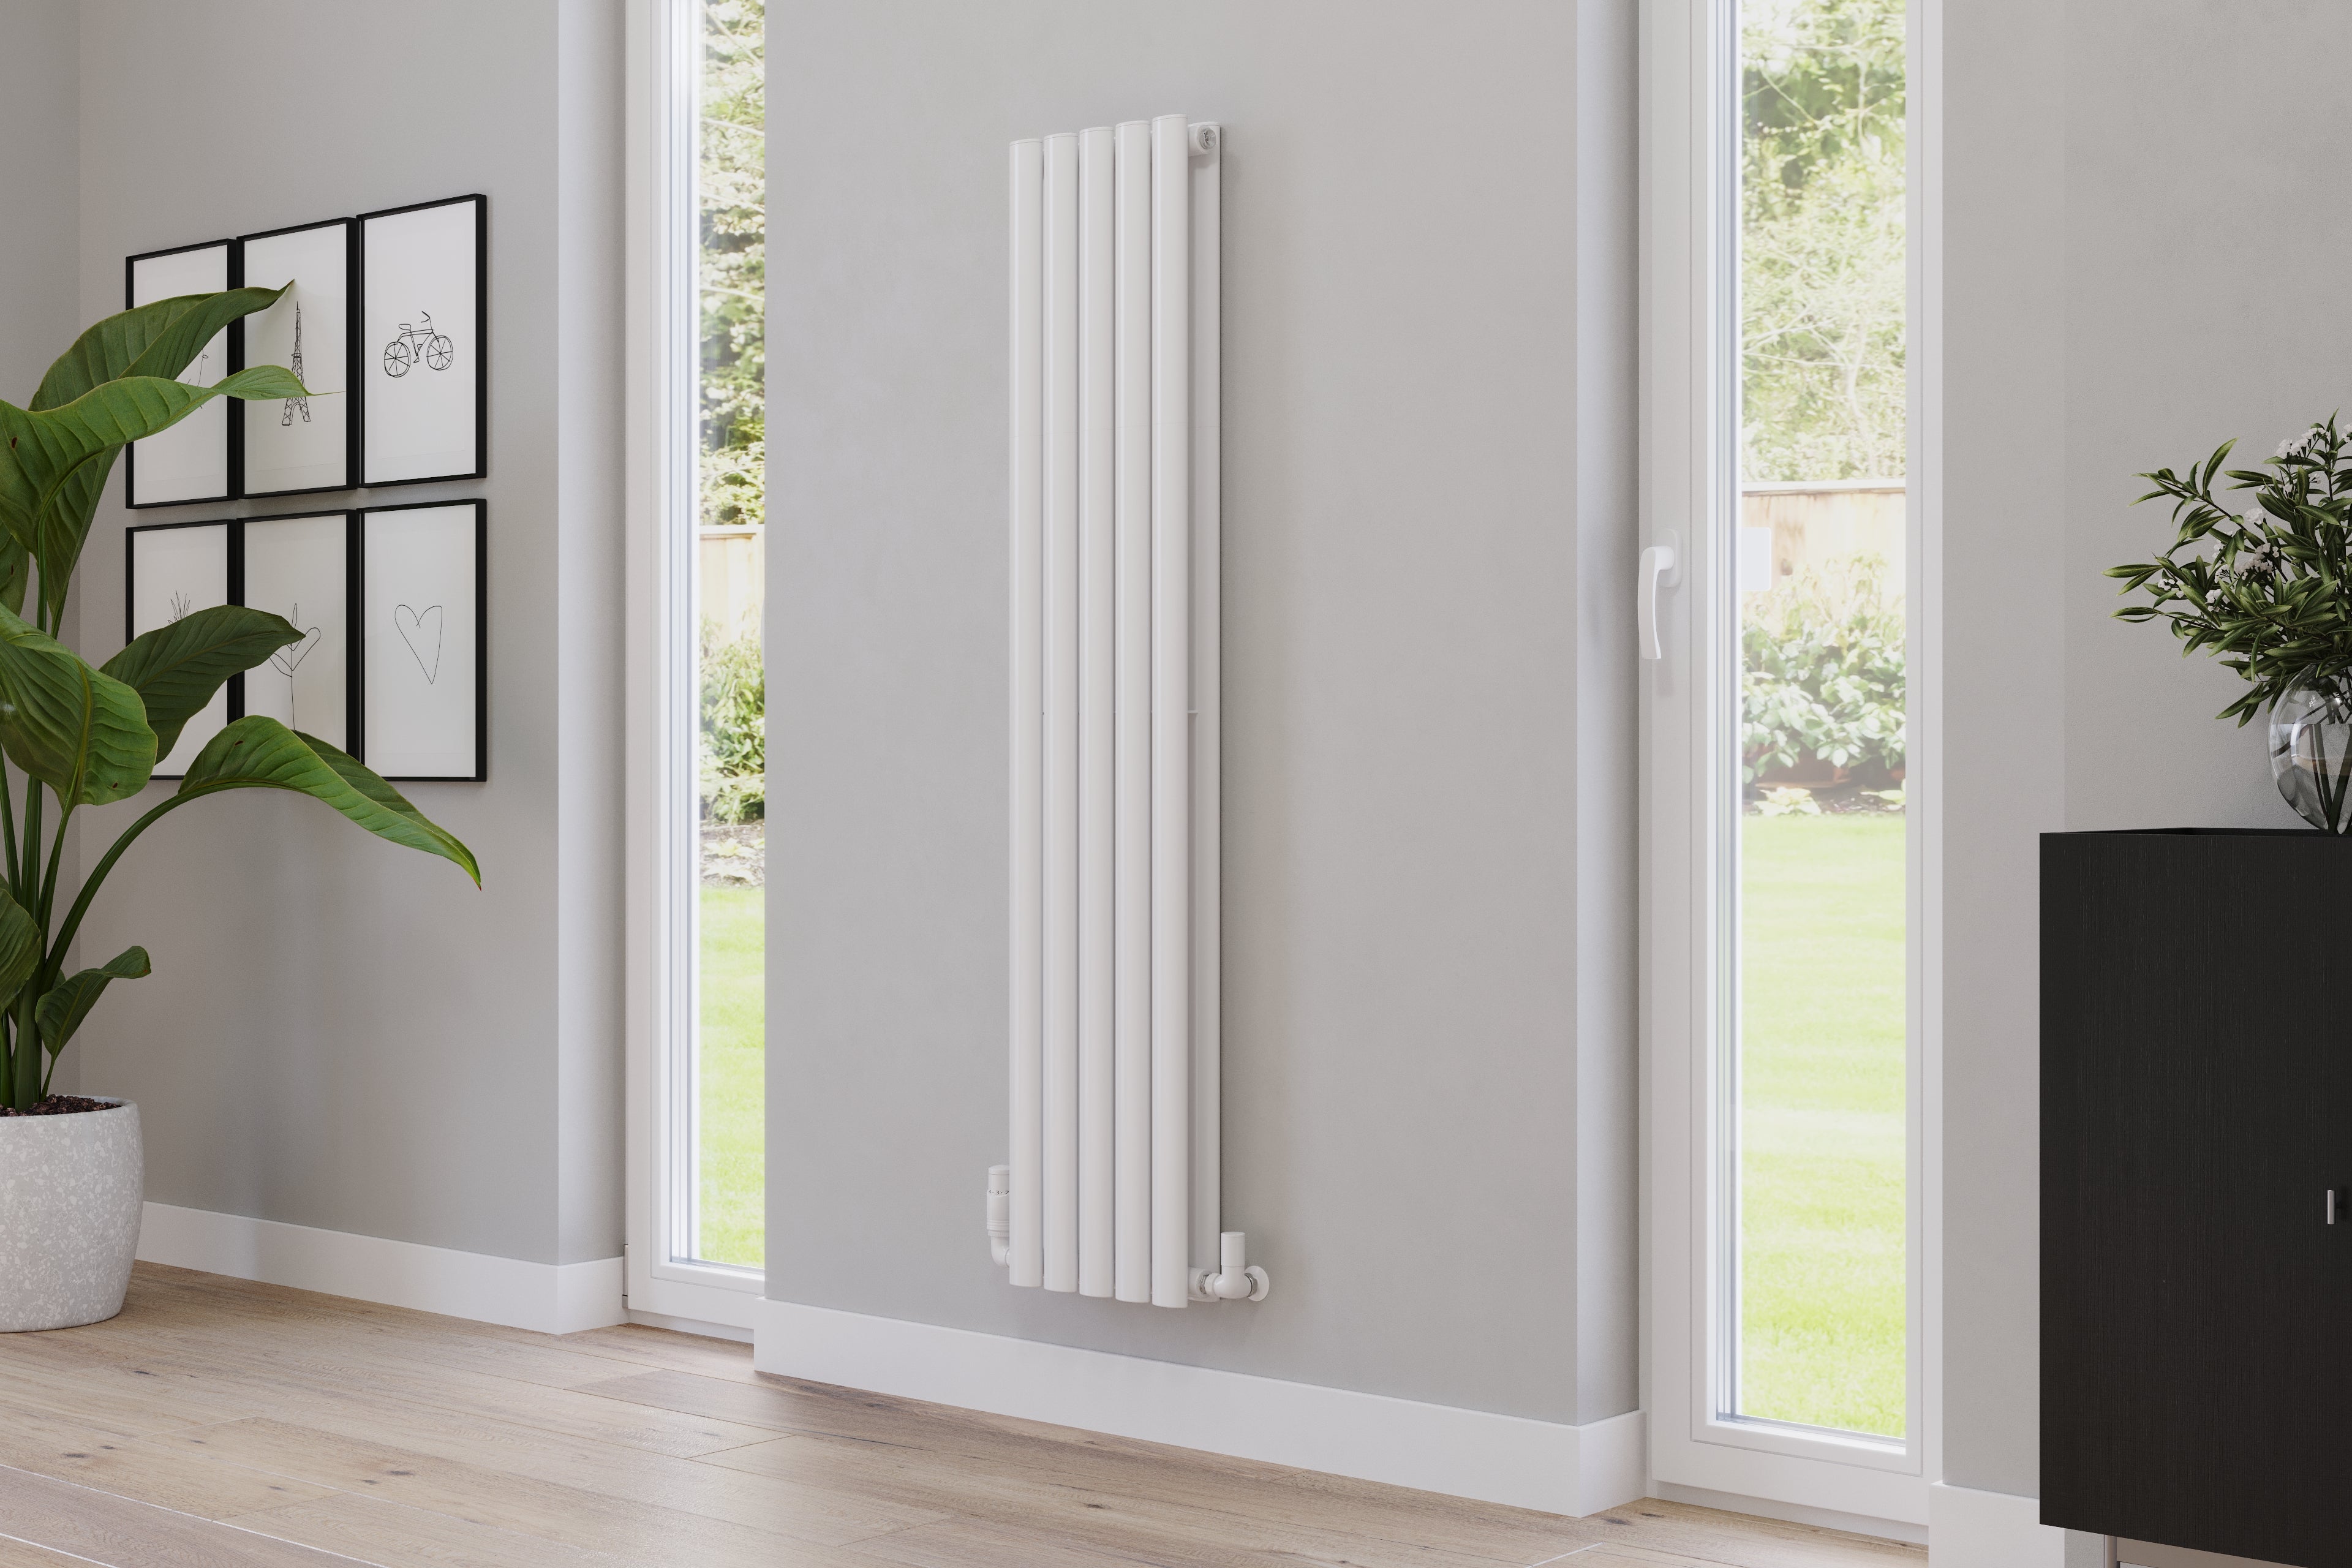 A tall, streamlined, white vertical radiator on a soft grey wall in a Scandi-inspired living room featuring green plants and vertical windows offering plenty of natural light.